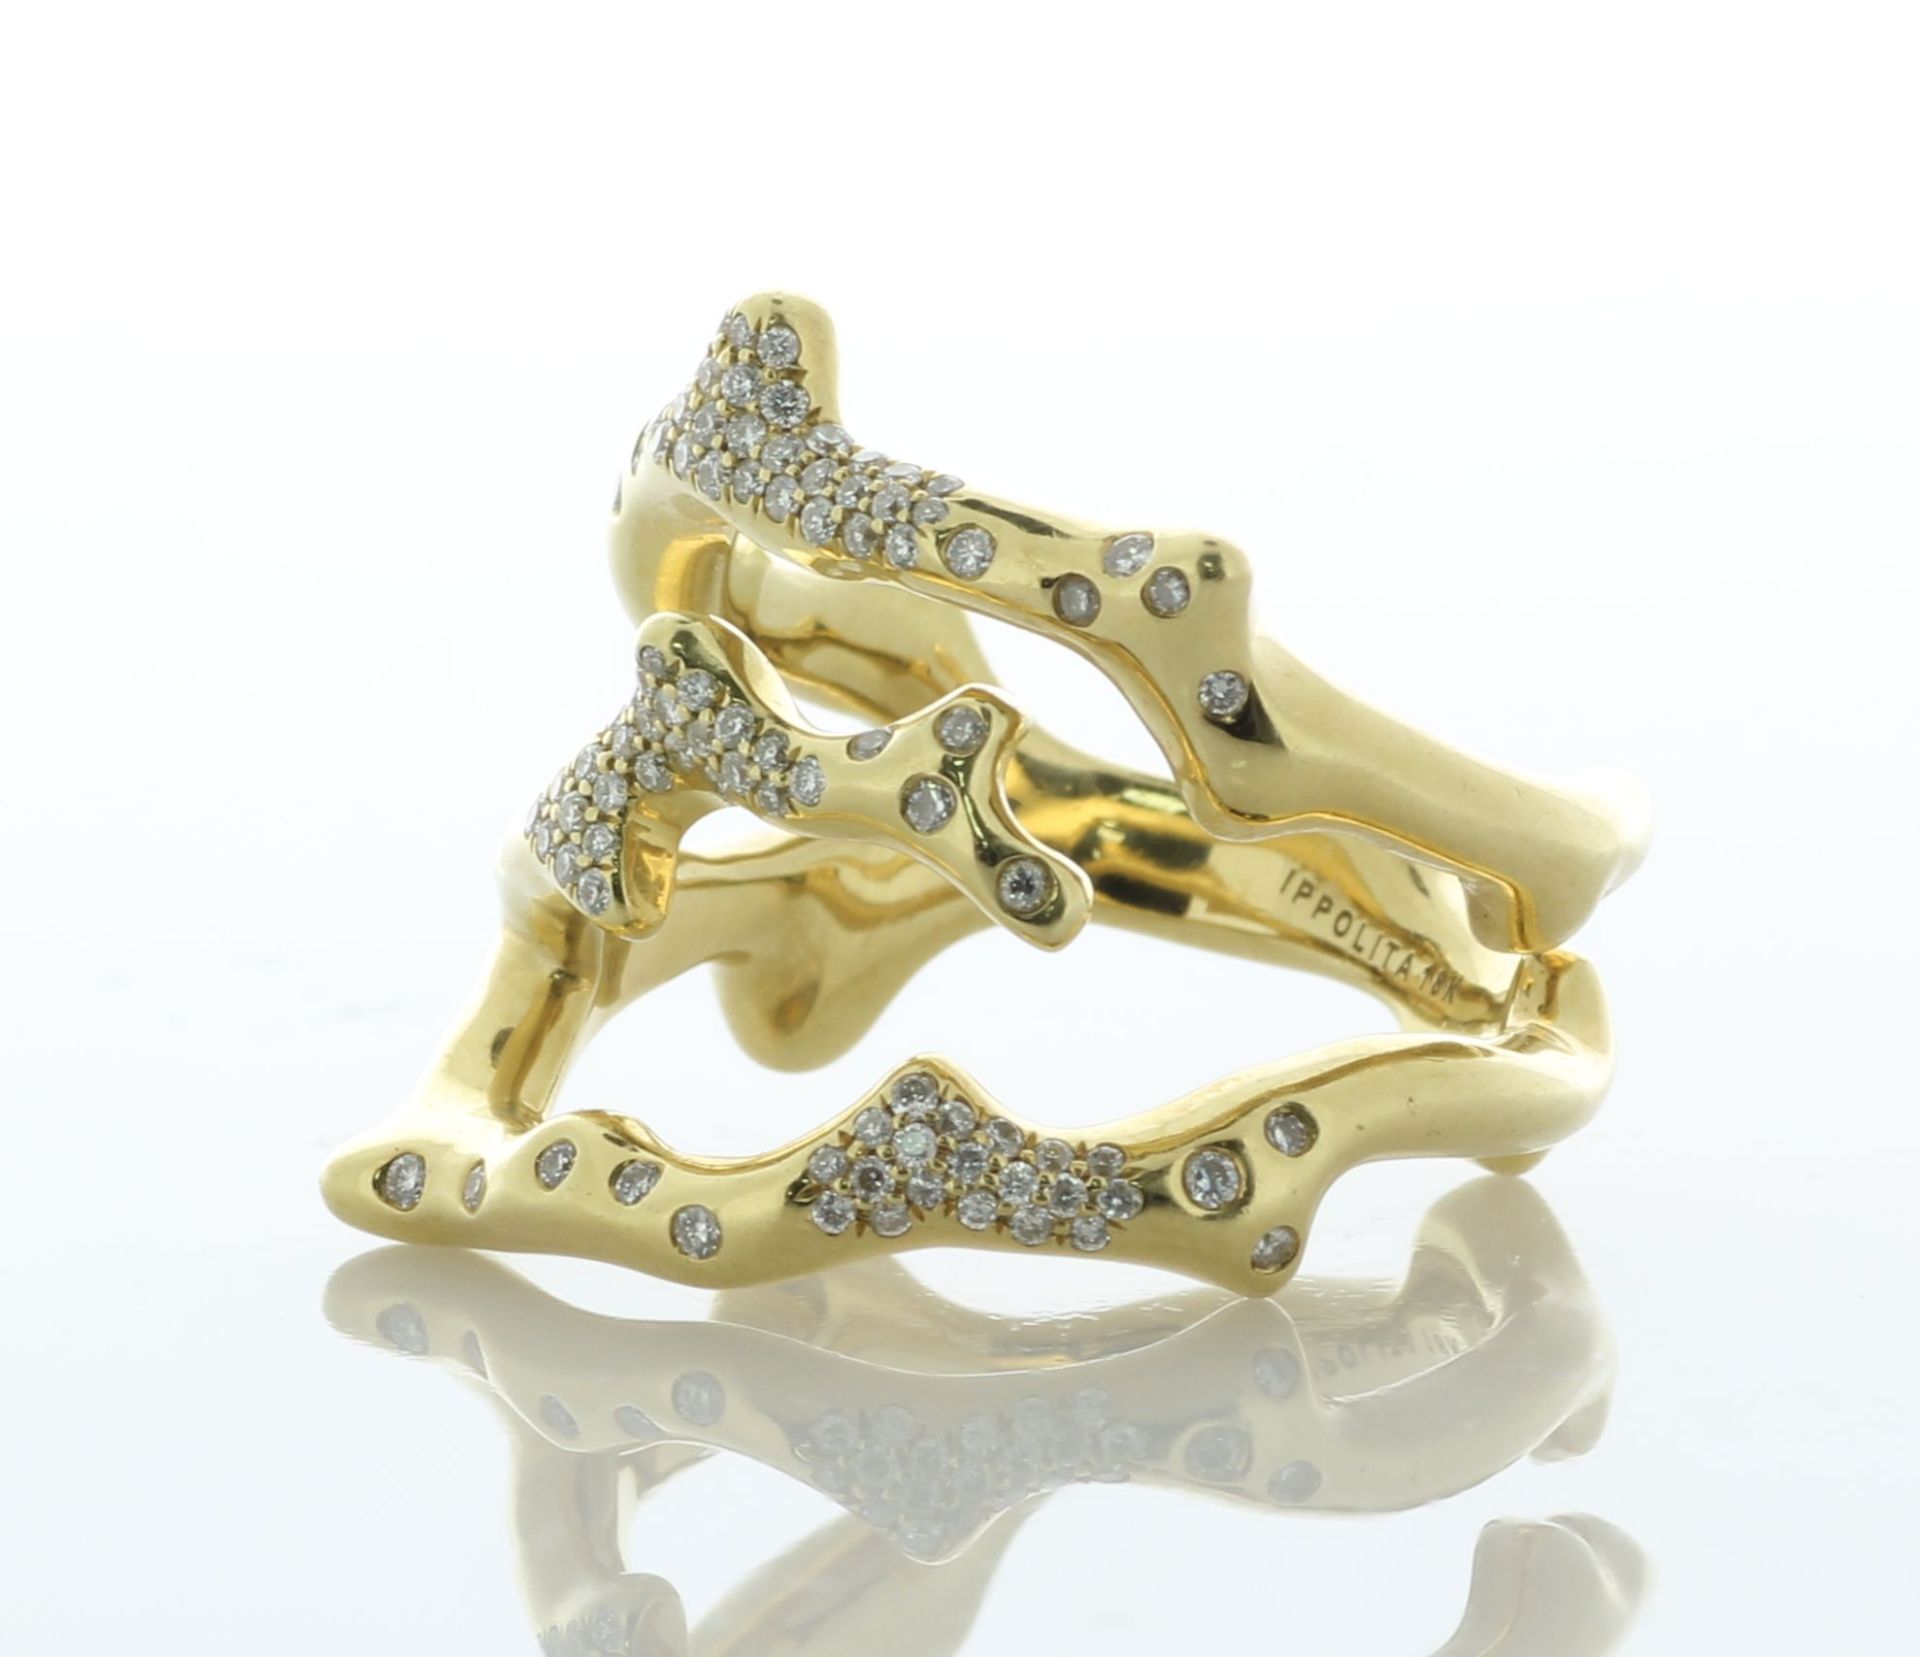 18ct Yellow Gold Ippolita Diamond Ring 0.75 Carats - Valued By AGI £7,950.00 - Inspired by the shape - Image 2 of 5